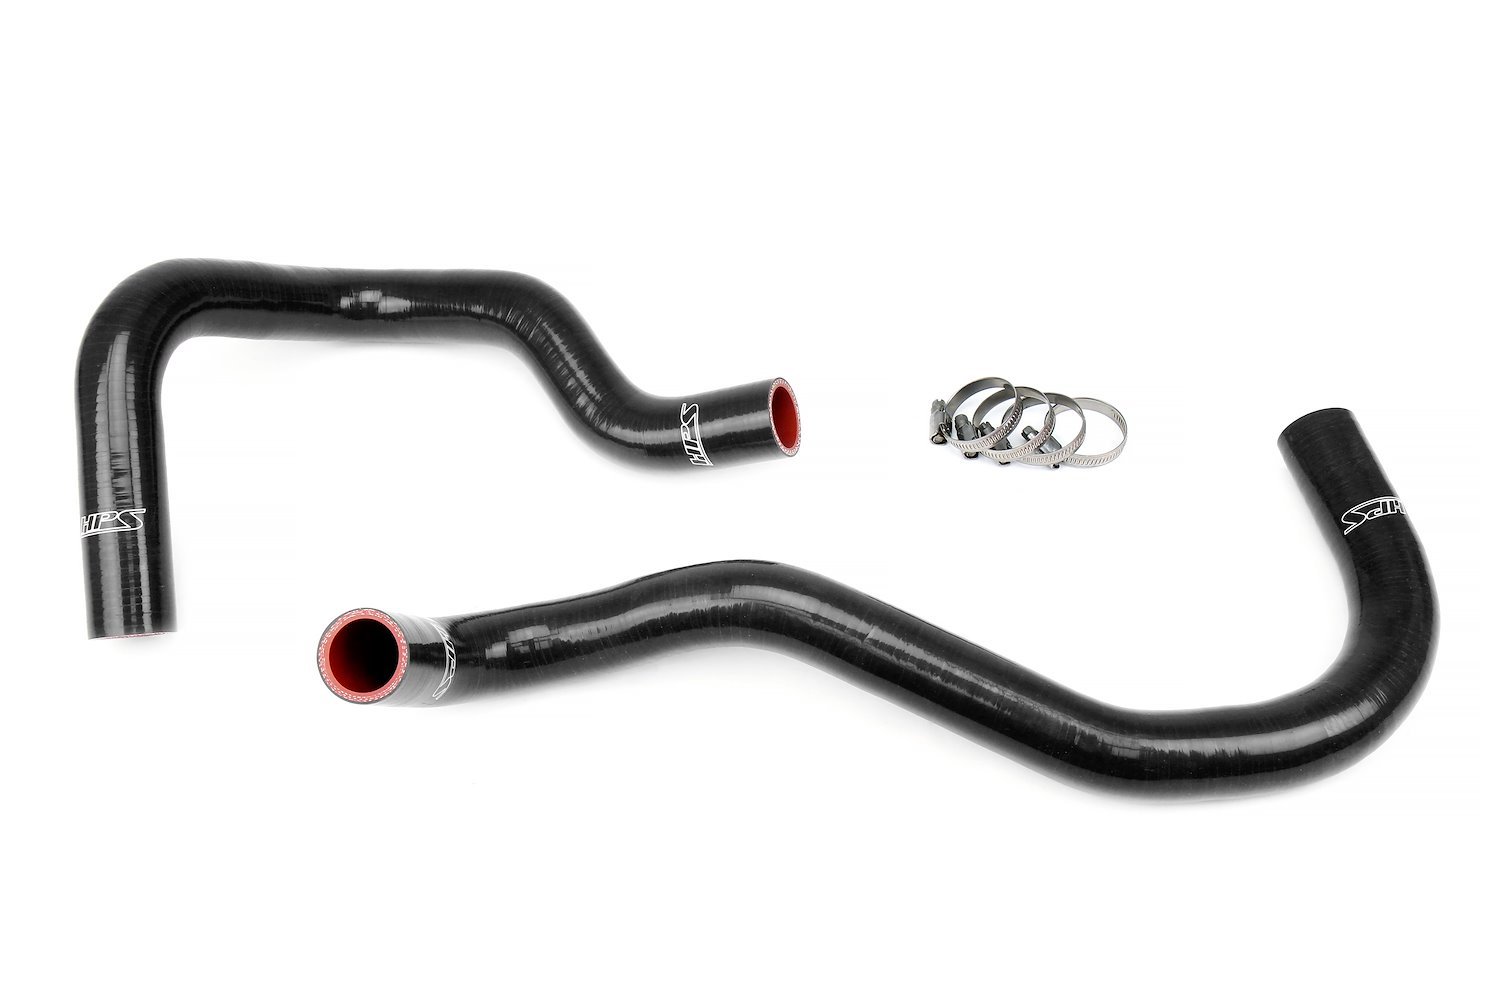 57-1921R-BLK Radiator Hose Kit, High-Temp 3-Ply Reinforced Silicone, Replaces OEM Rubber Radiator Hoses